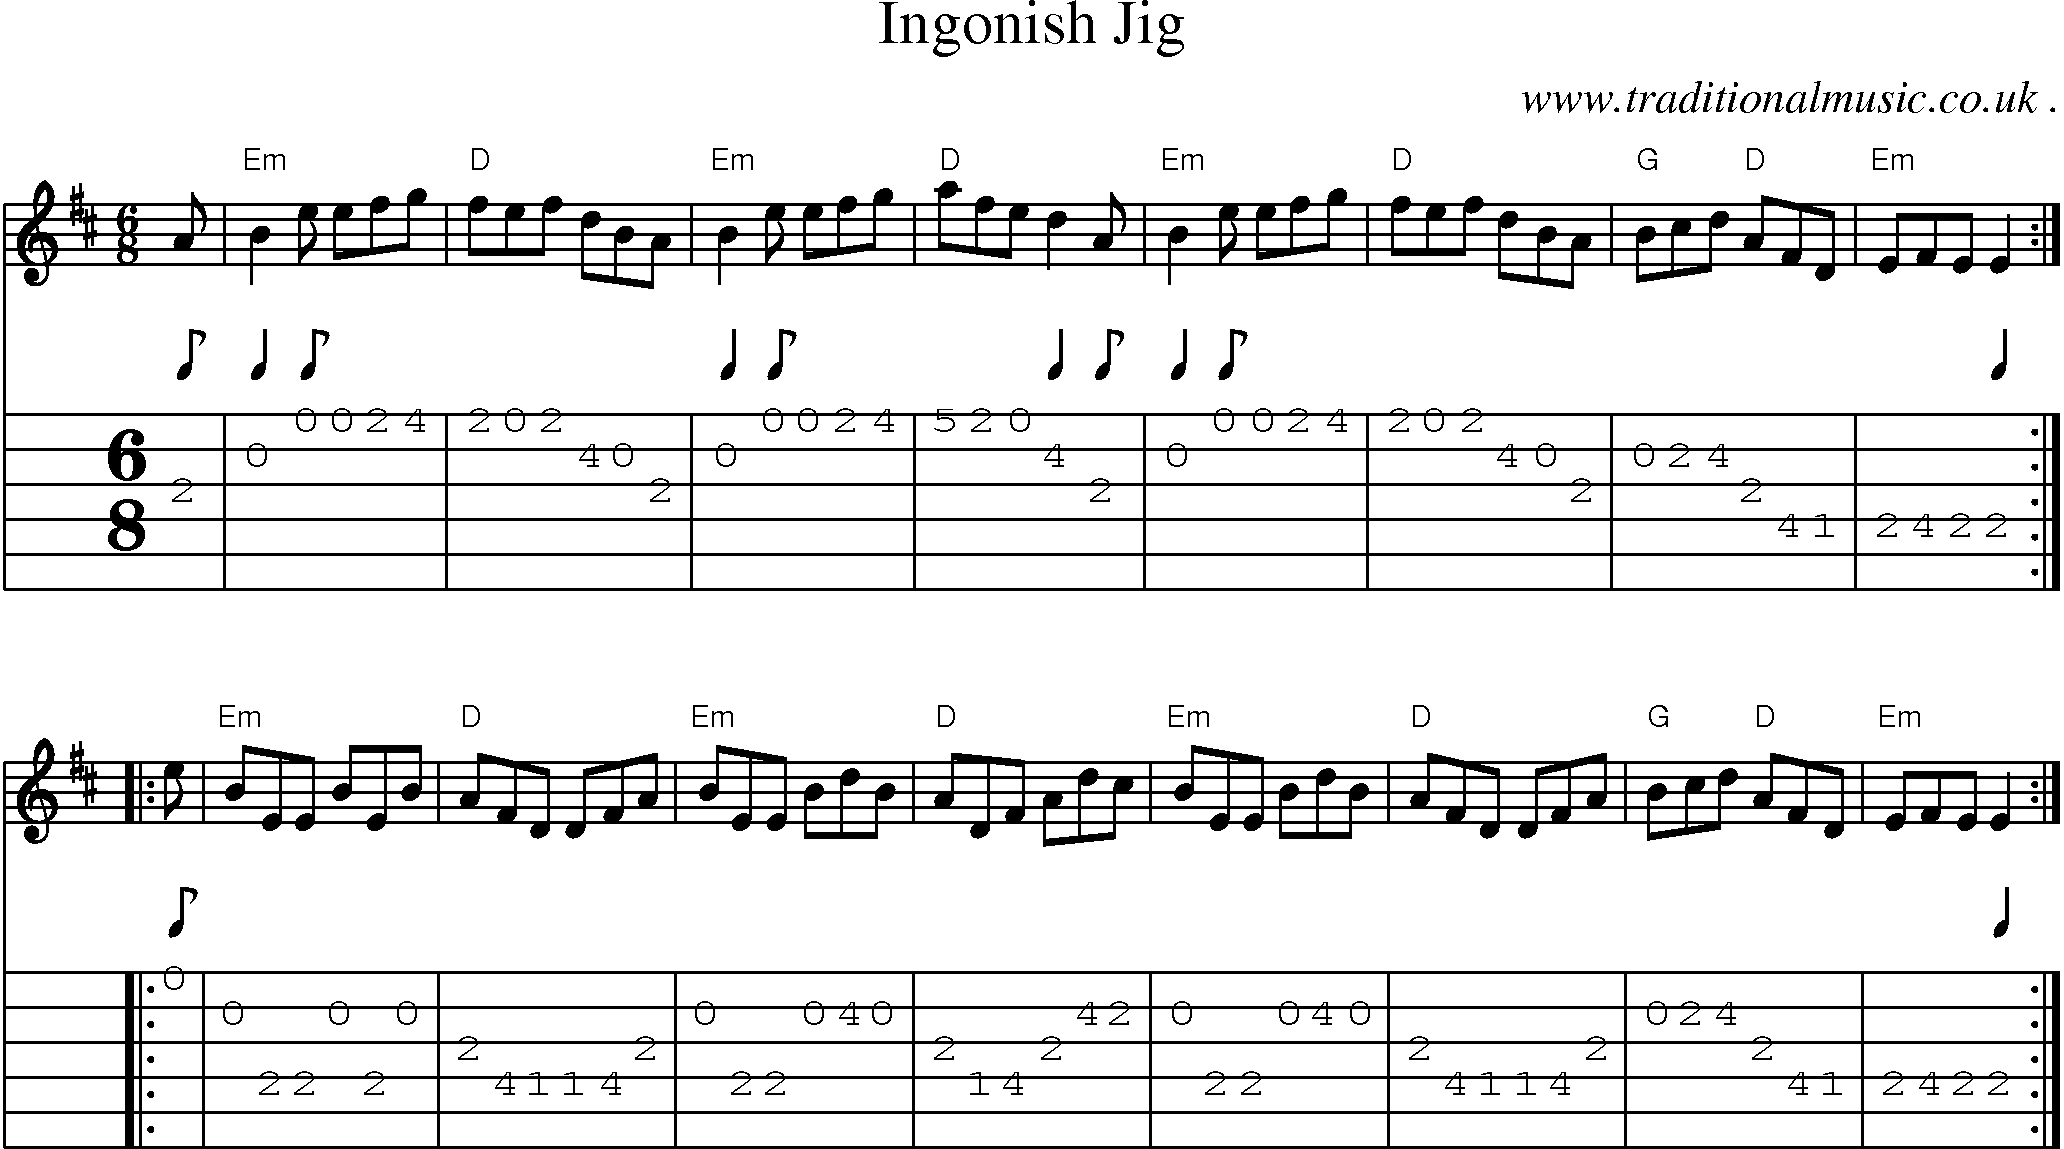 Sheet-music  score, Chords and Guitar Tabs for Ingonish Jig